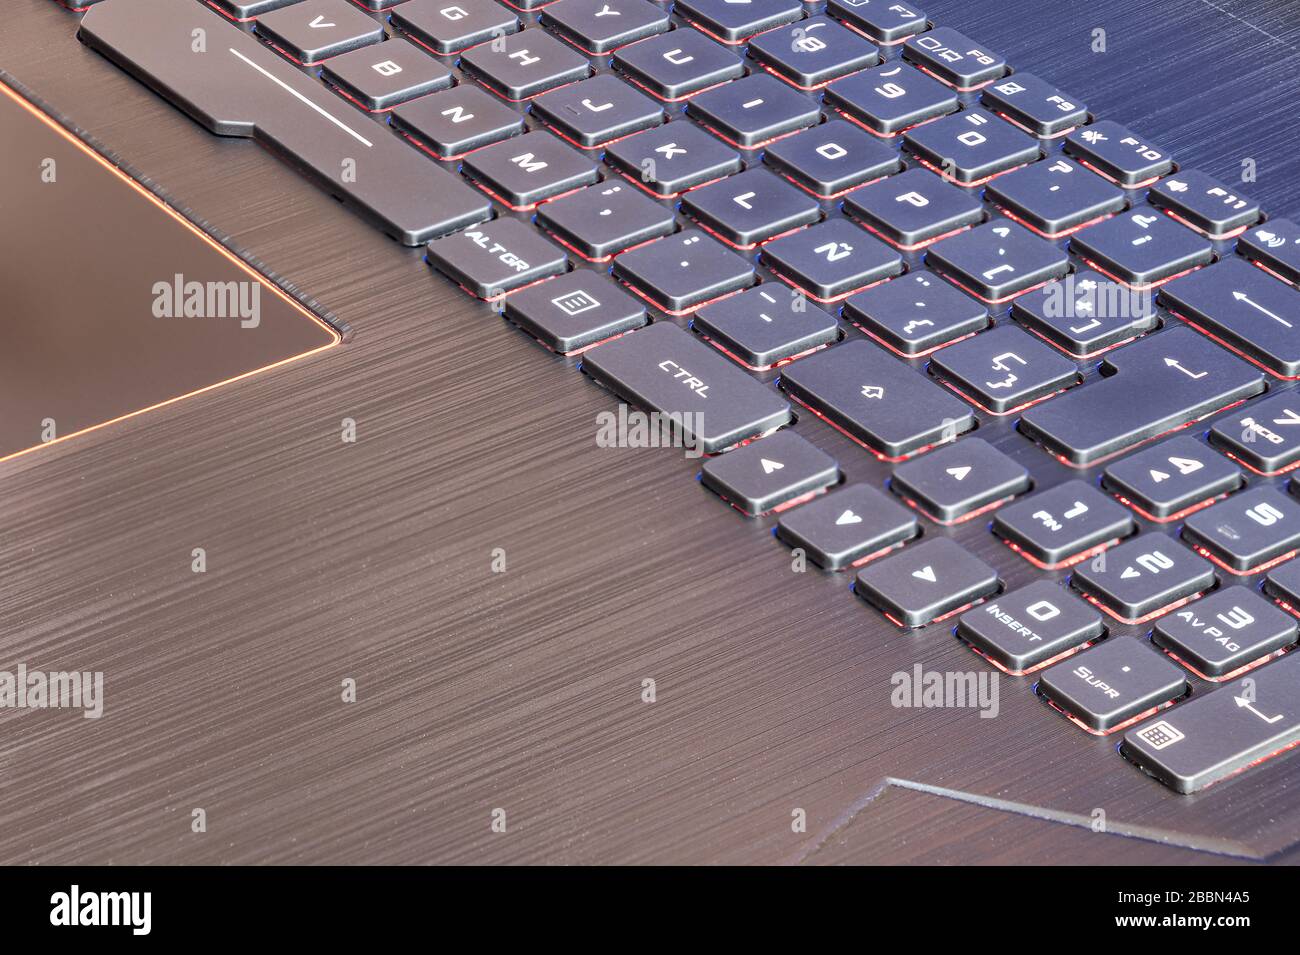 Spanish keyboard laptop with the characteristic letter Ñ of the Spanish alphabet and illuminated keys Stock Photo